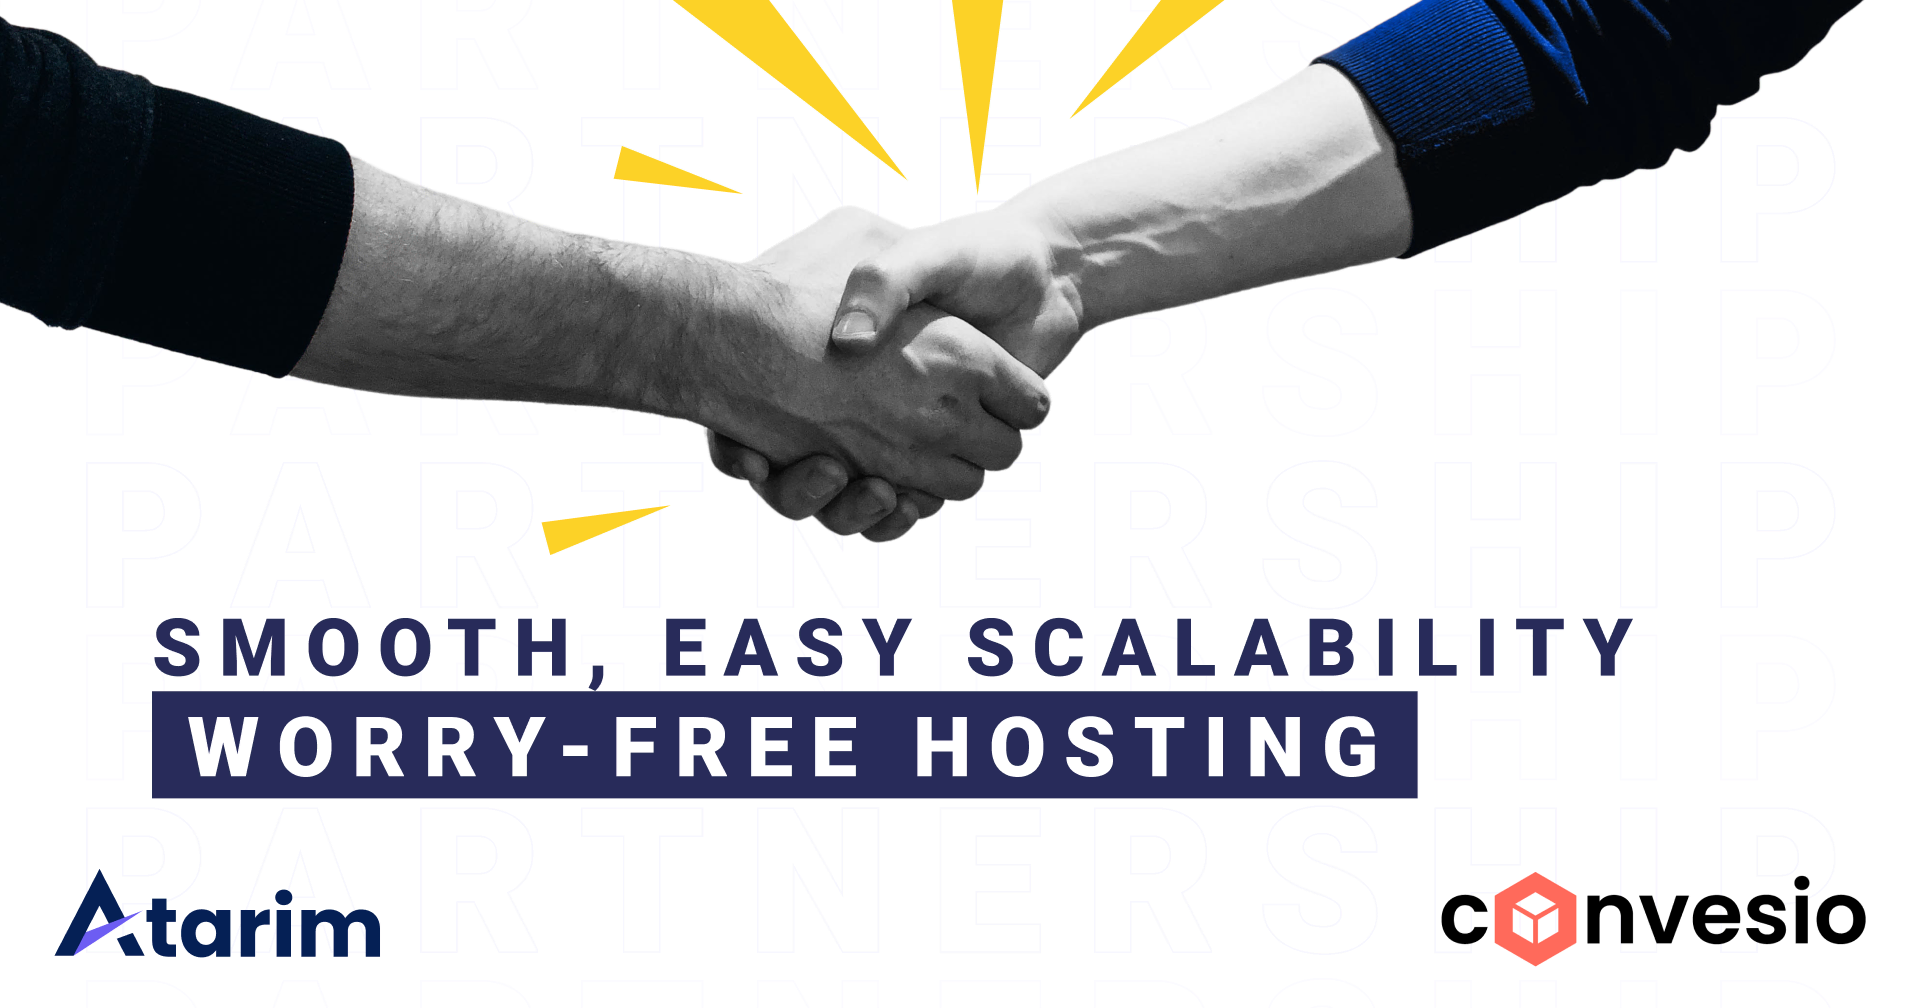 Atarim and Convesio Smooth, Easy Scalability and Worry-Free Hosting